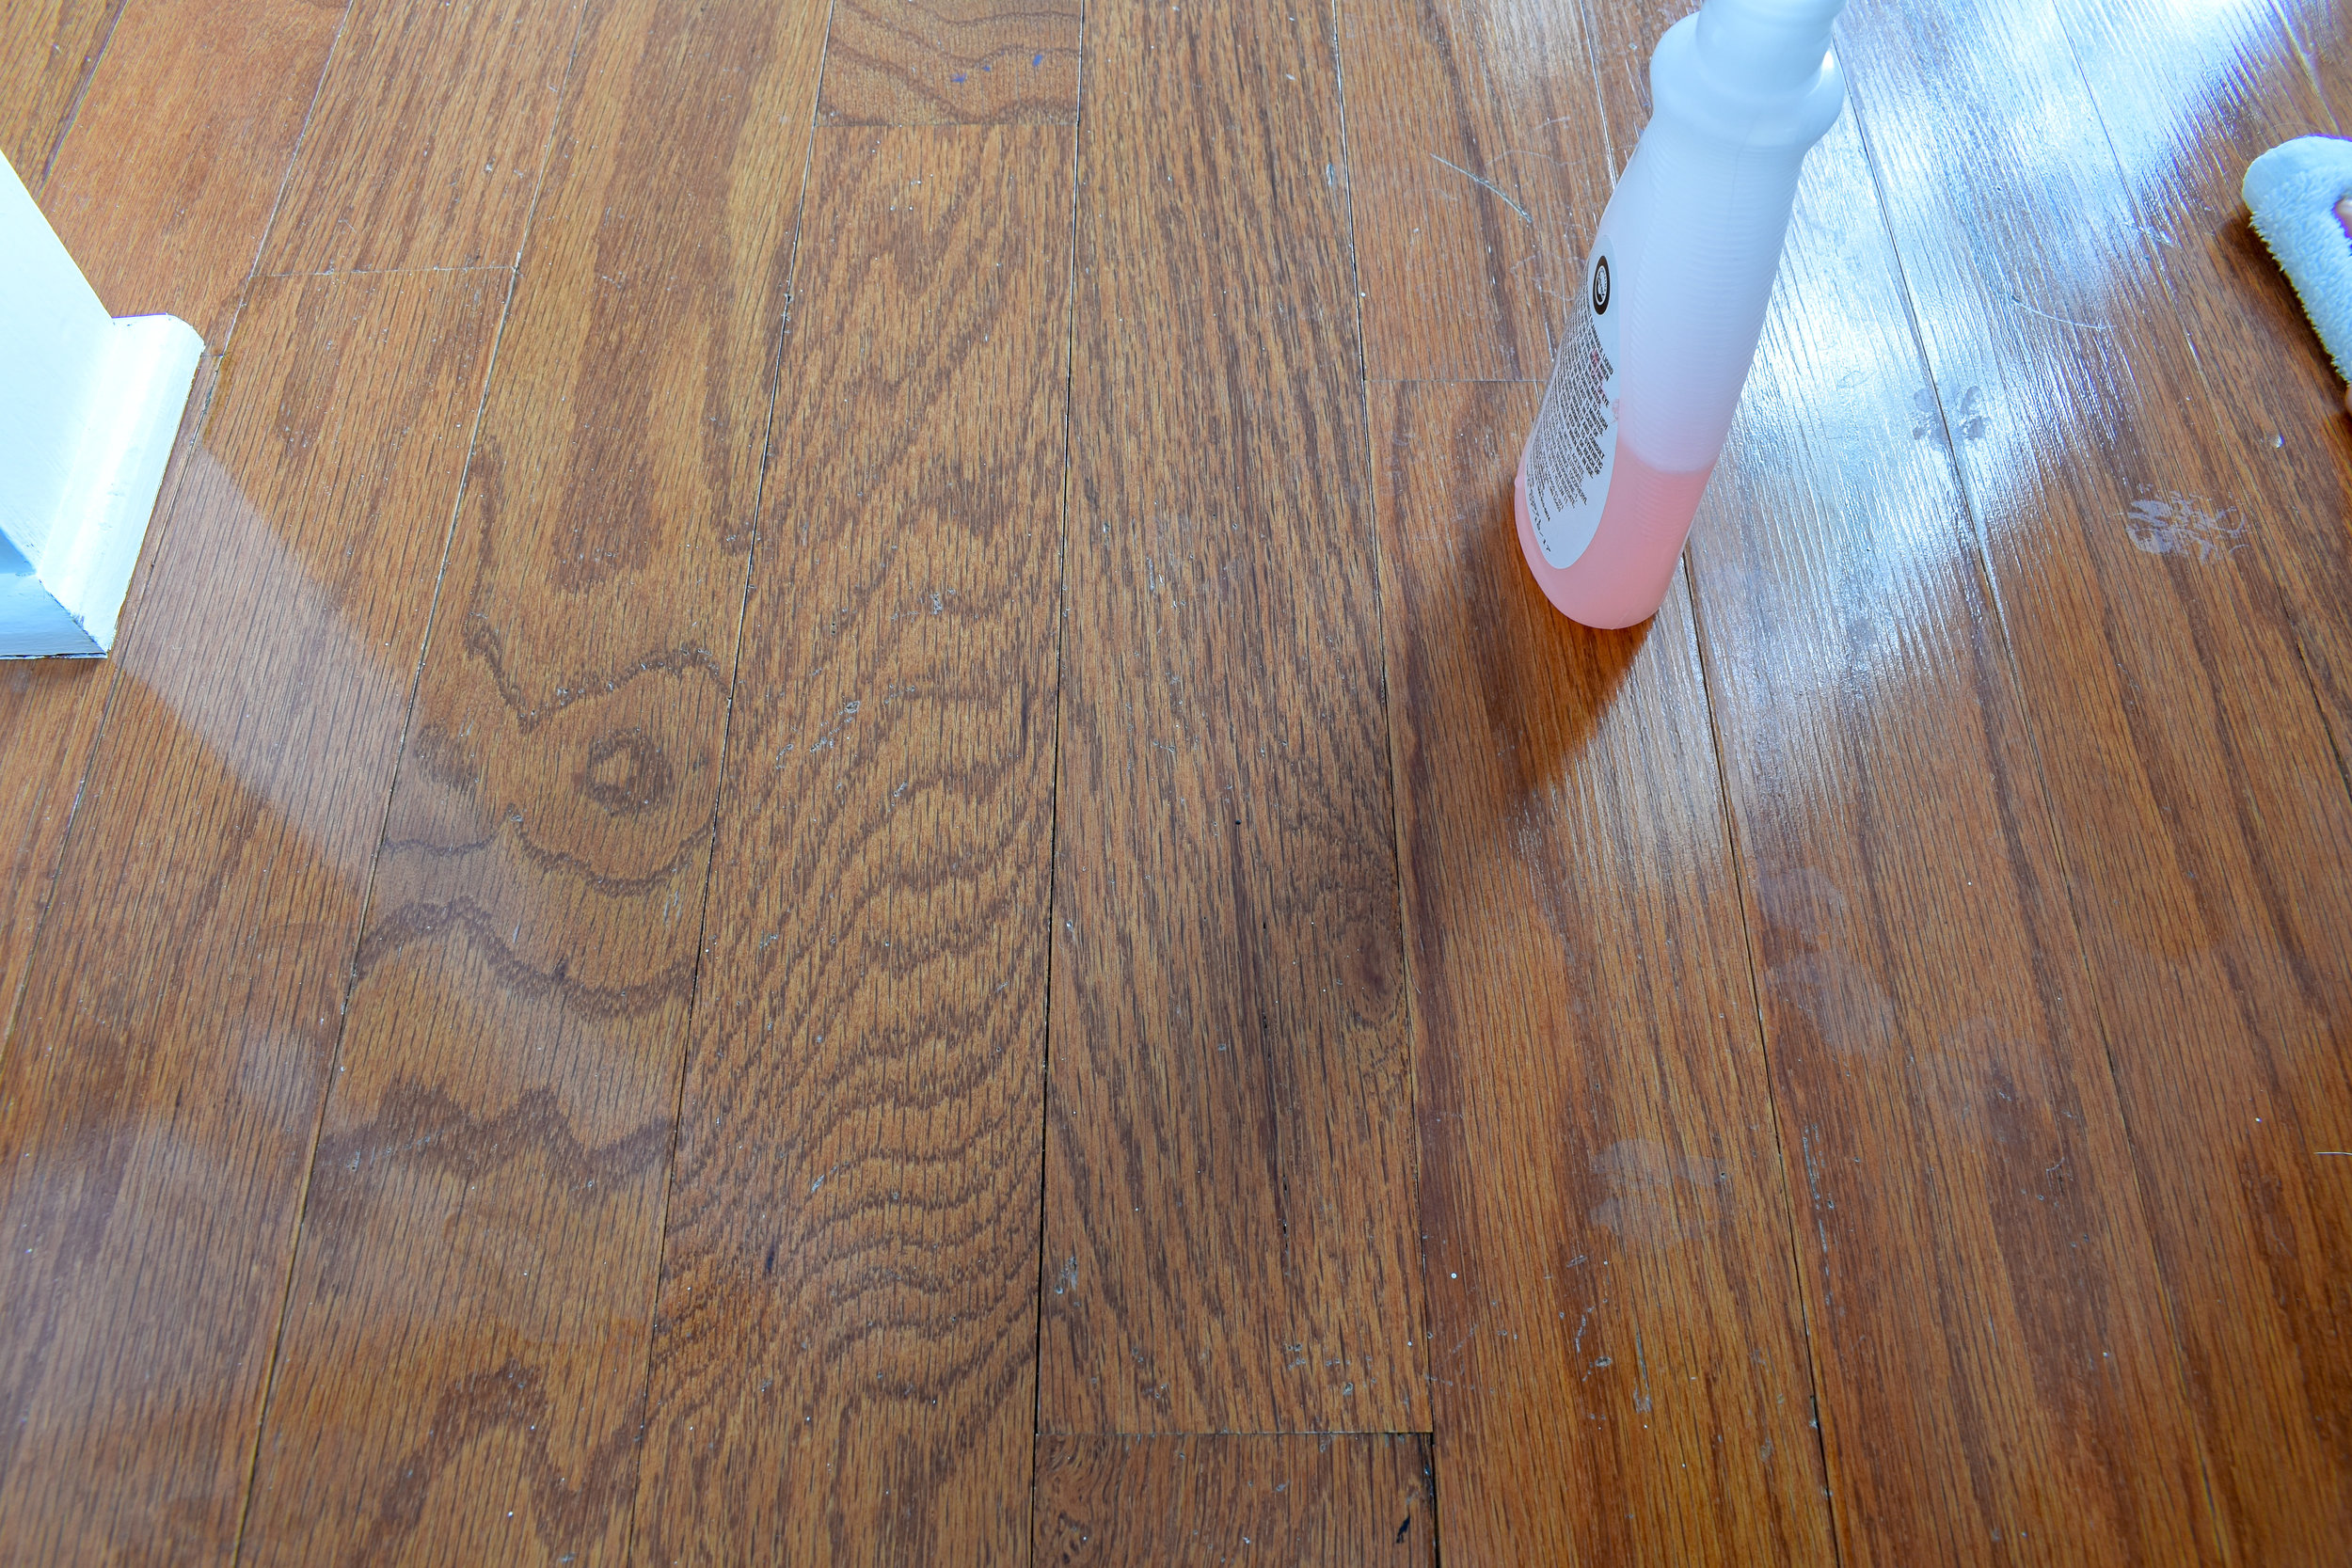 The easiest method for removing dried paint and stain from finished wood floors and furniture.